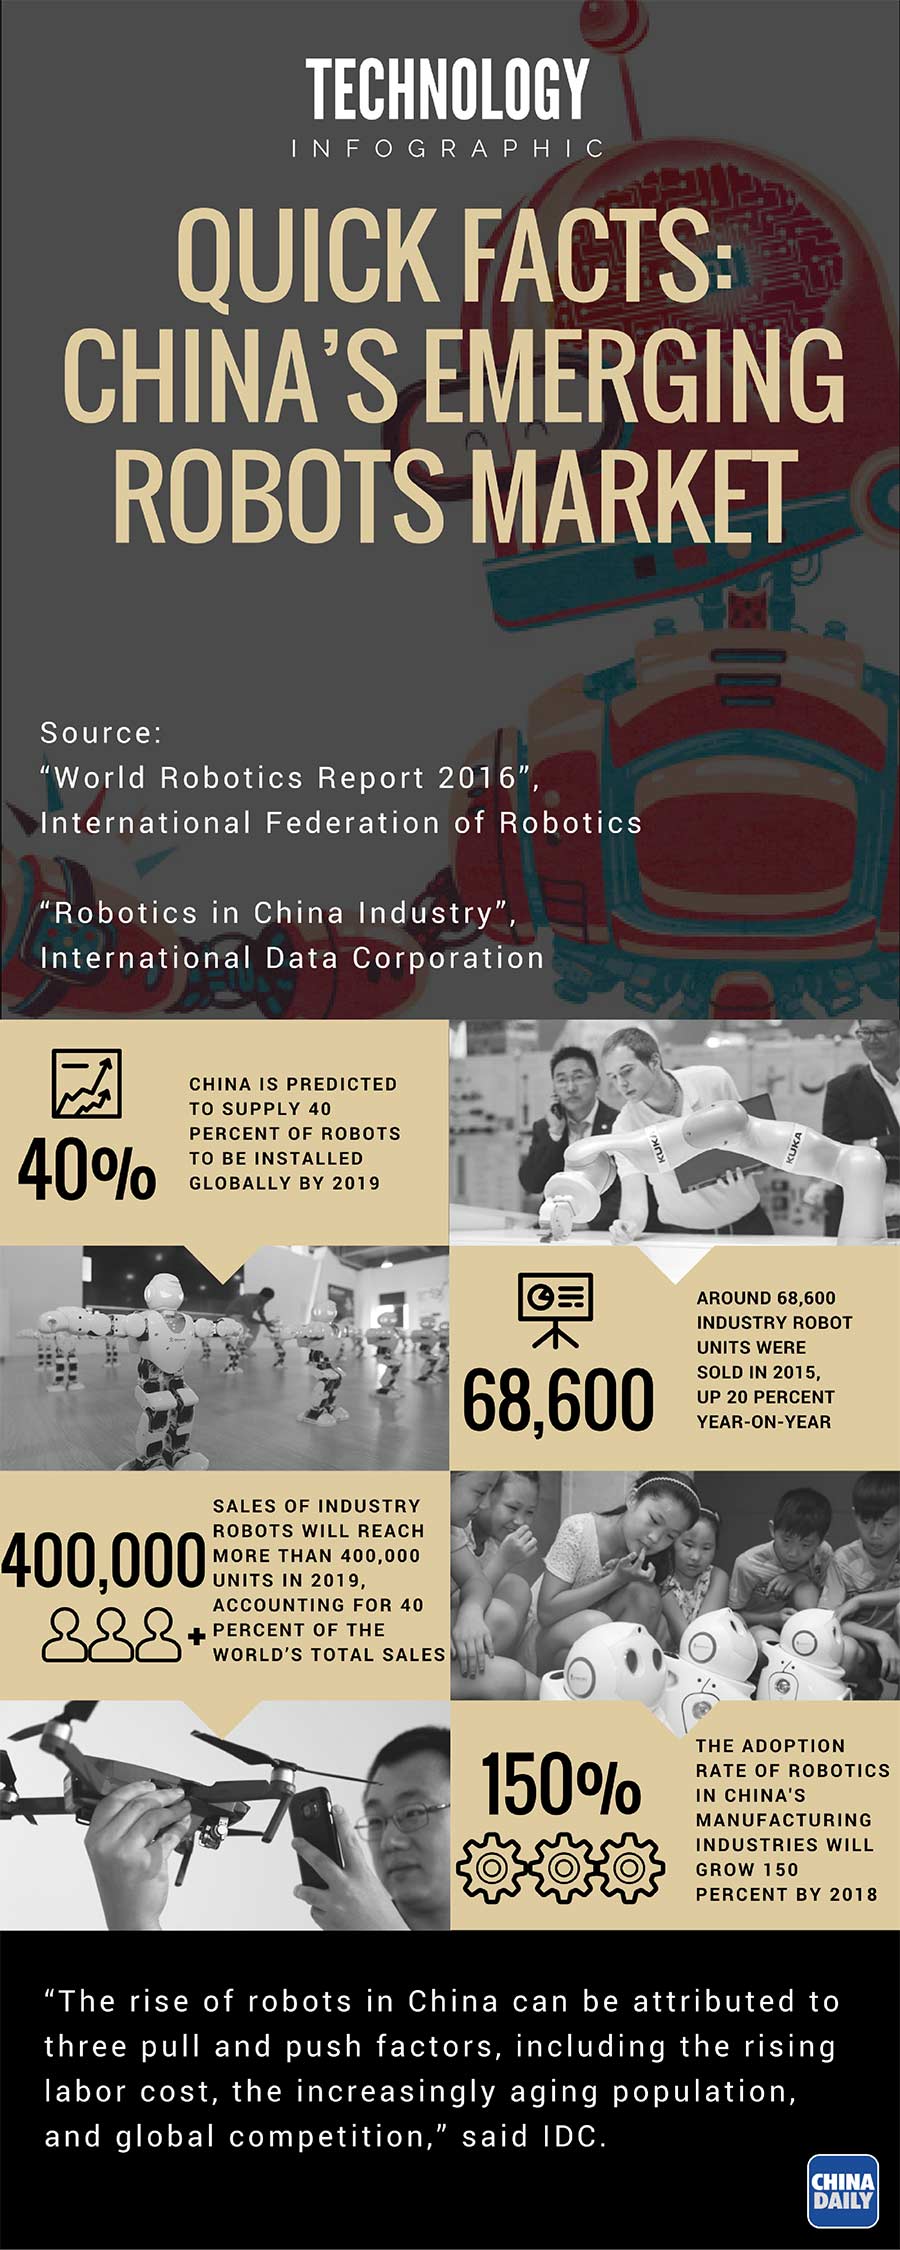 Quick facts: China's emerging robots market